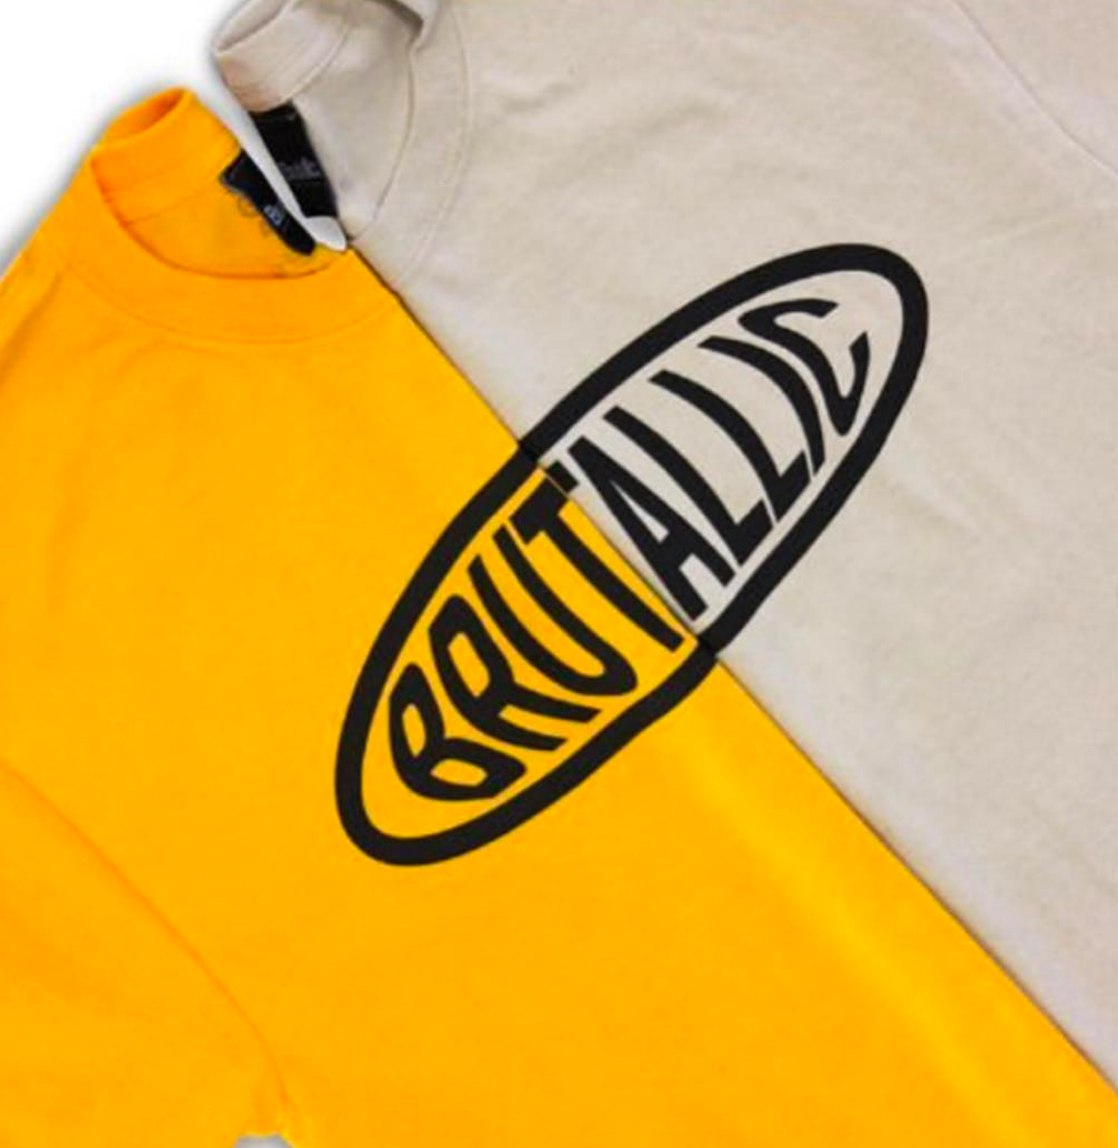 Brutallic Streetwear bubble tea tshirts with oval front logo, and buddha on the back, khaki tan beige color and mustard yellow color shirt close up of cropped front logos split in the middle